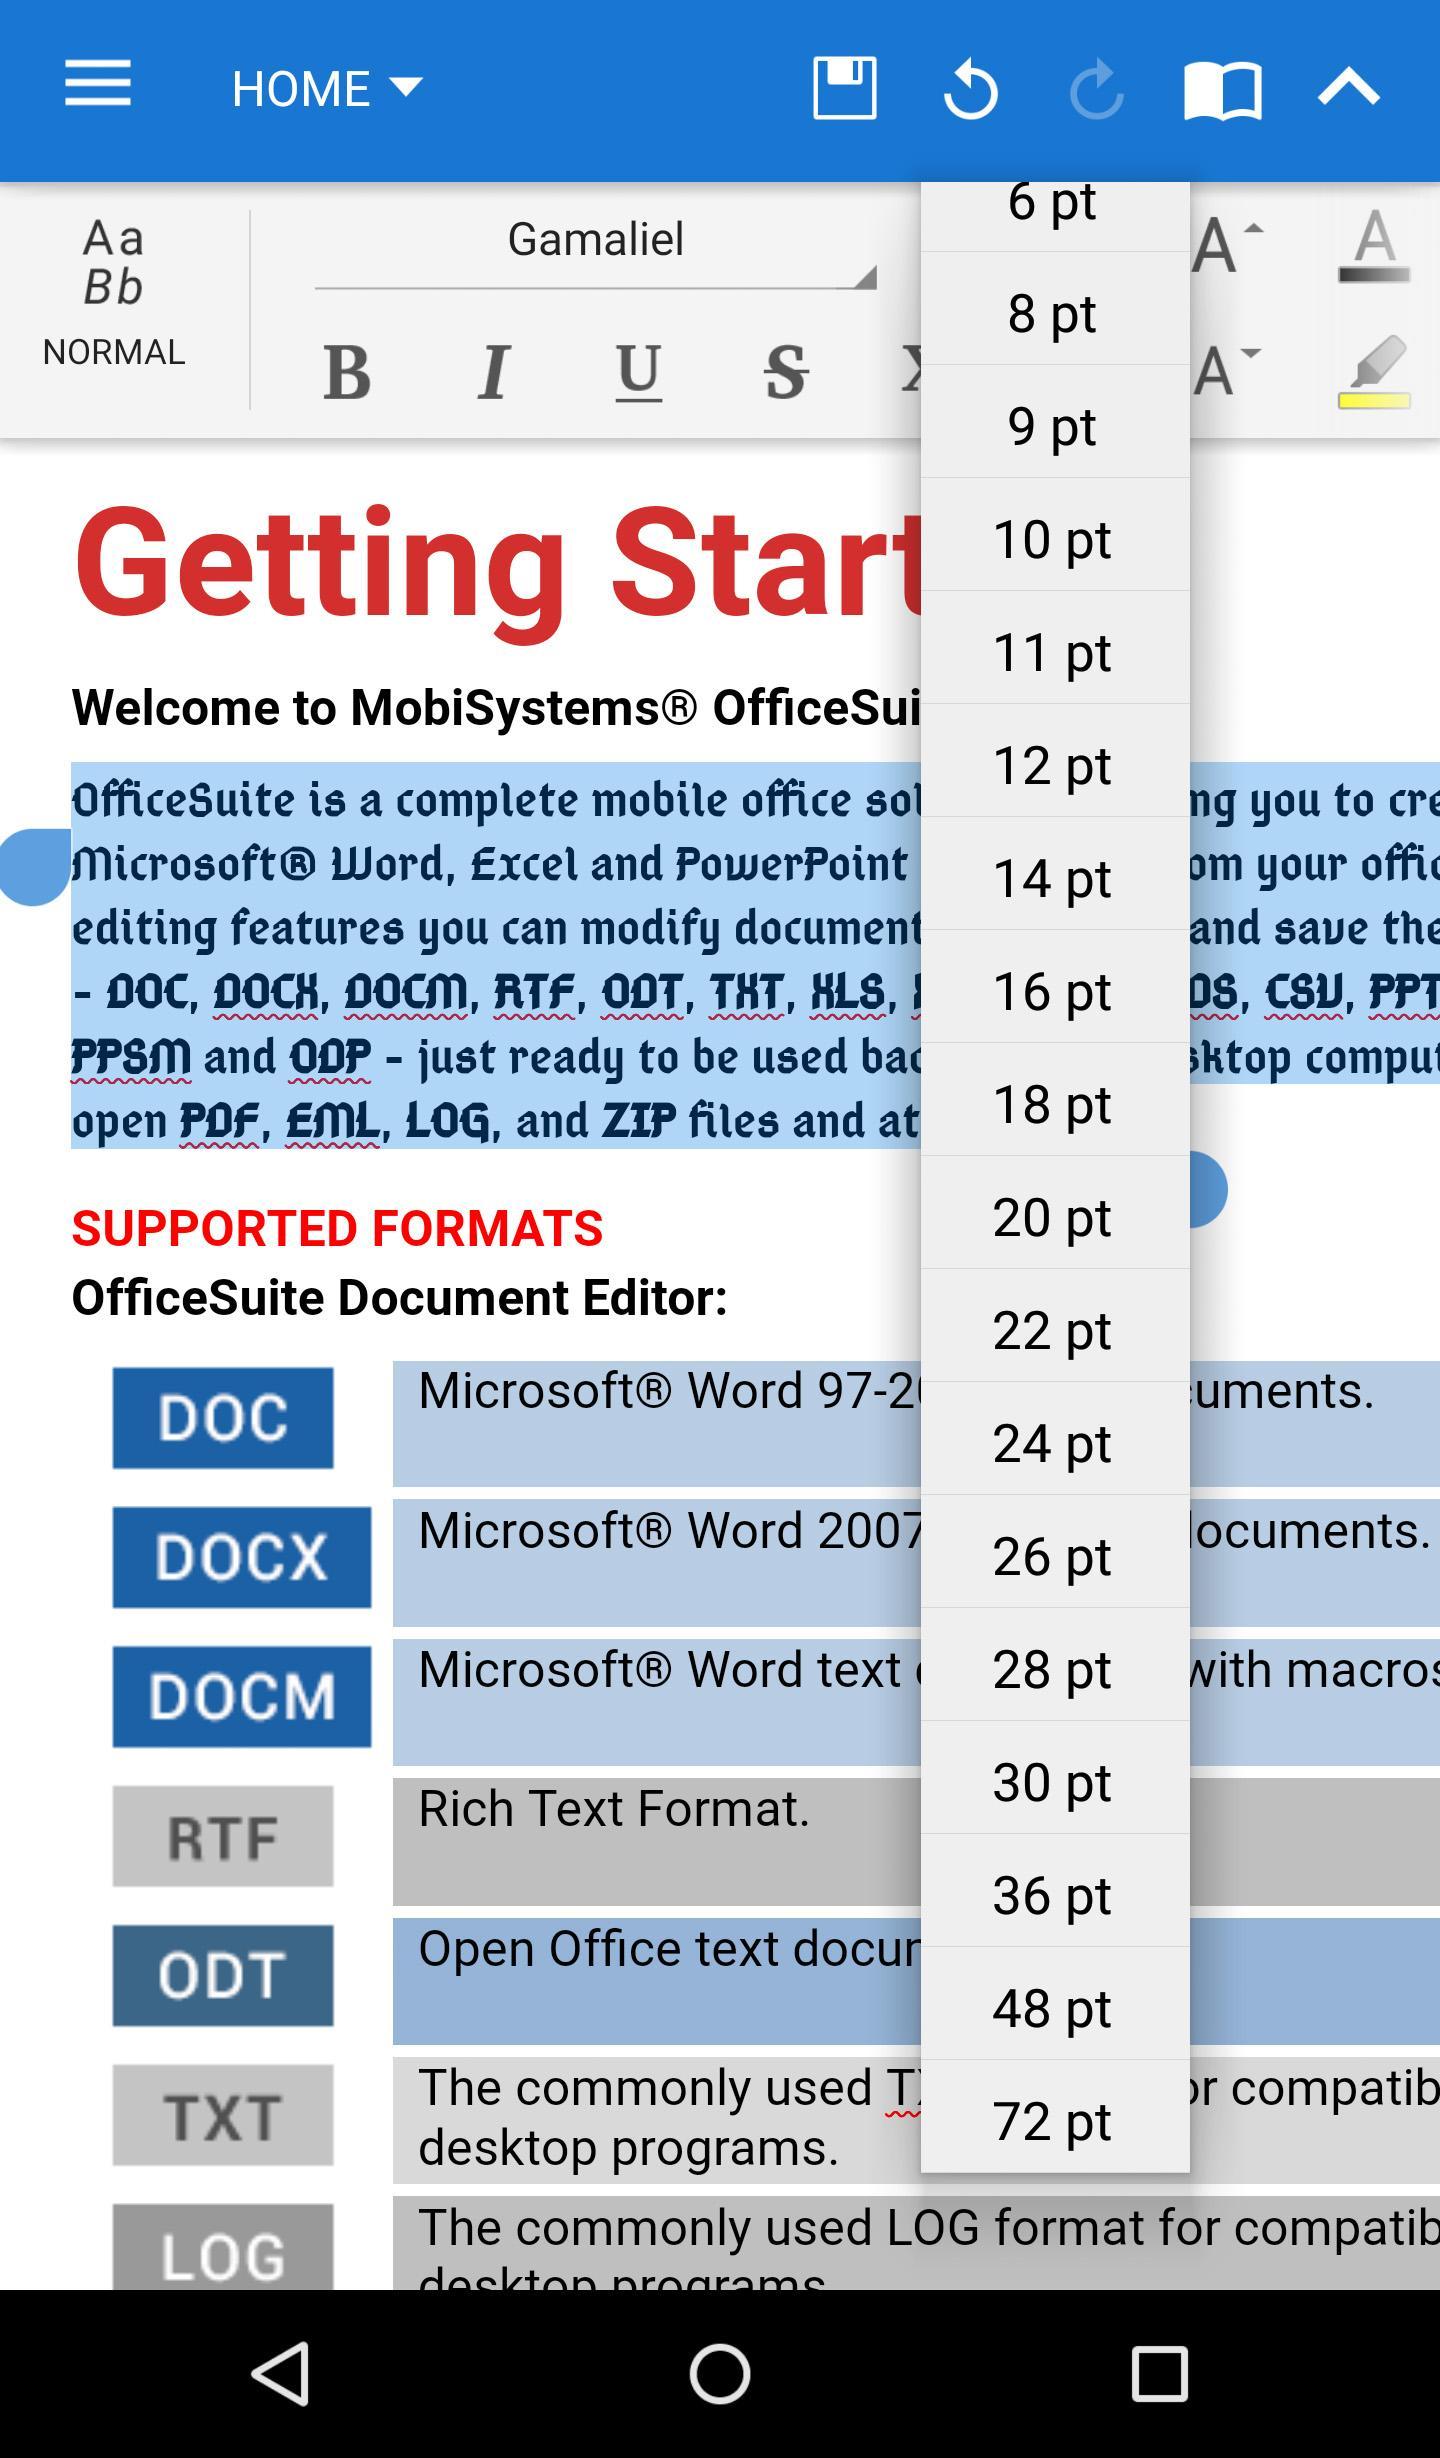 OfficeSuite Font Pack for Android - APK Download